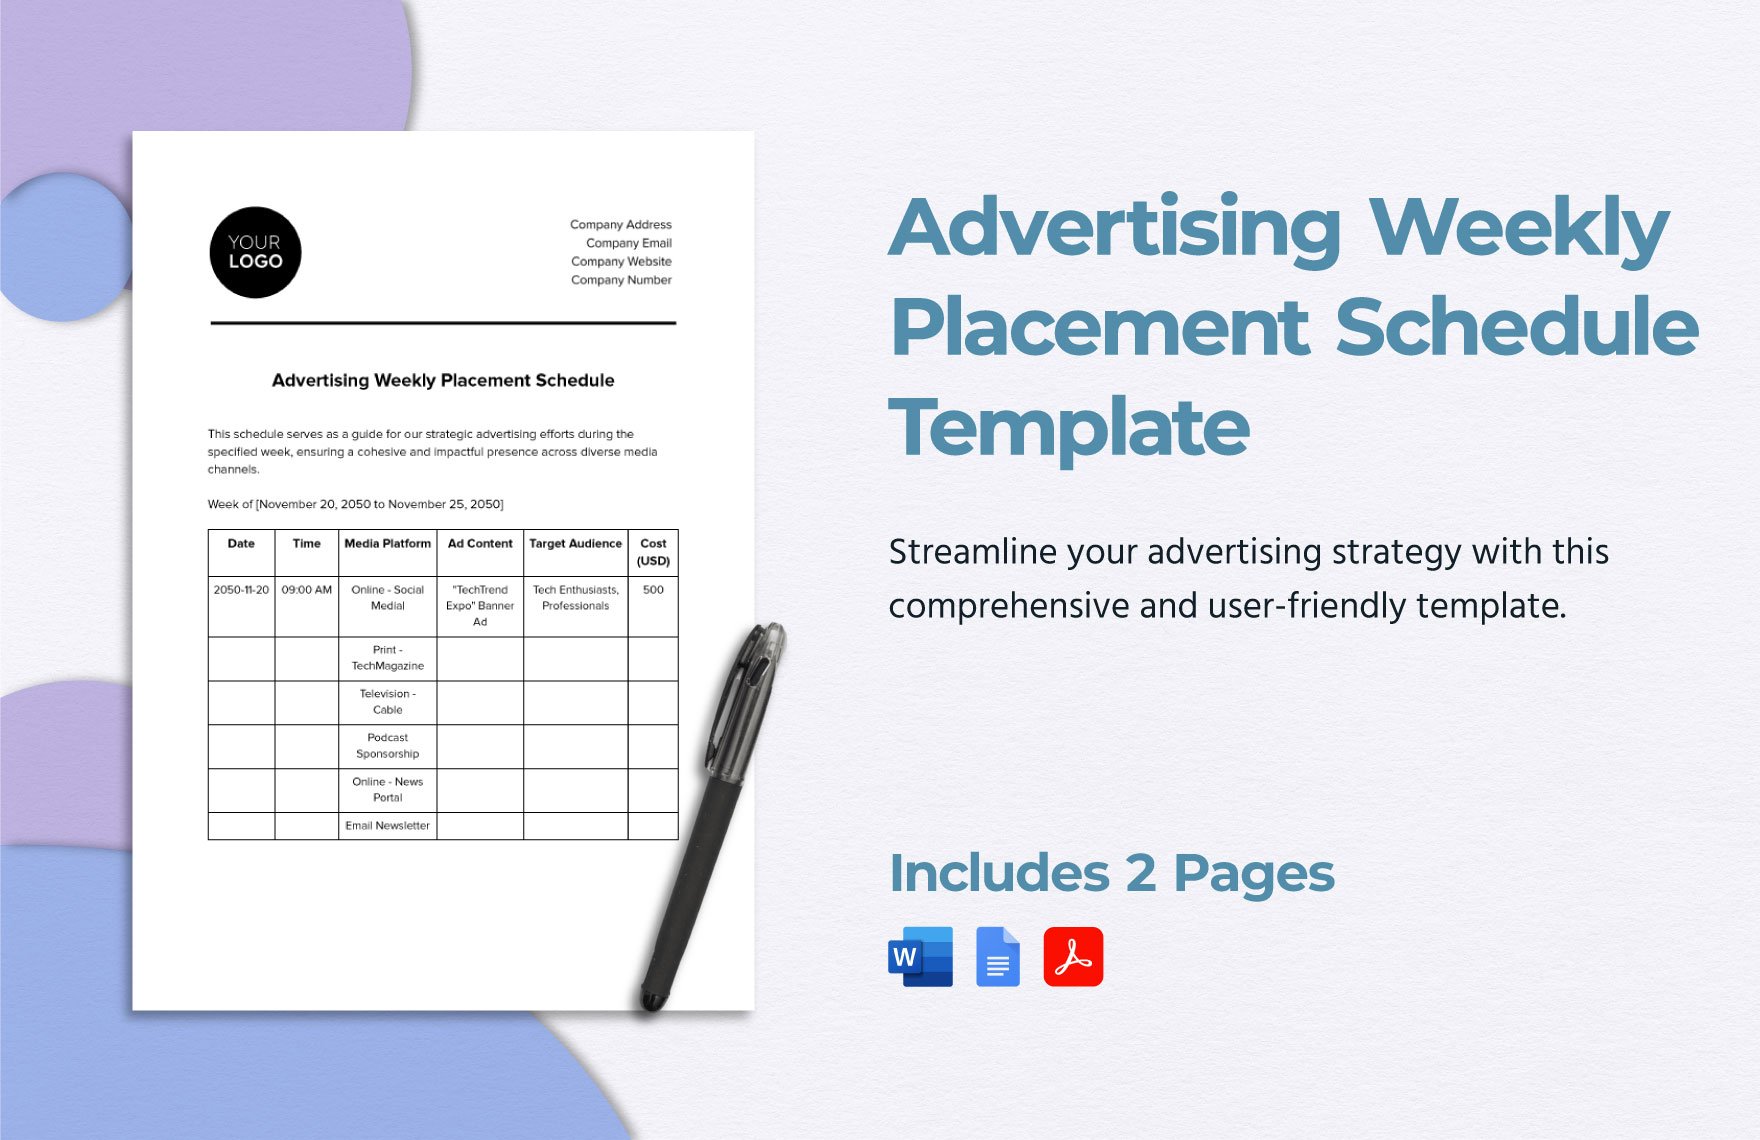 Advertising Weekly Placement Schedule Template in Word, Google Docs, PDF